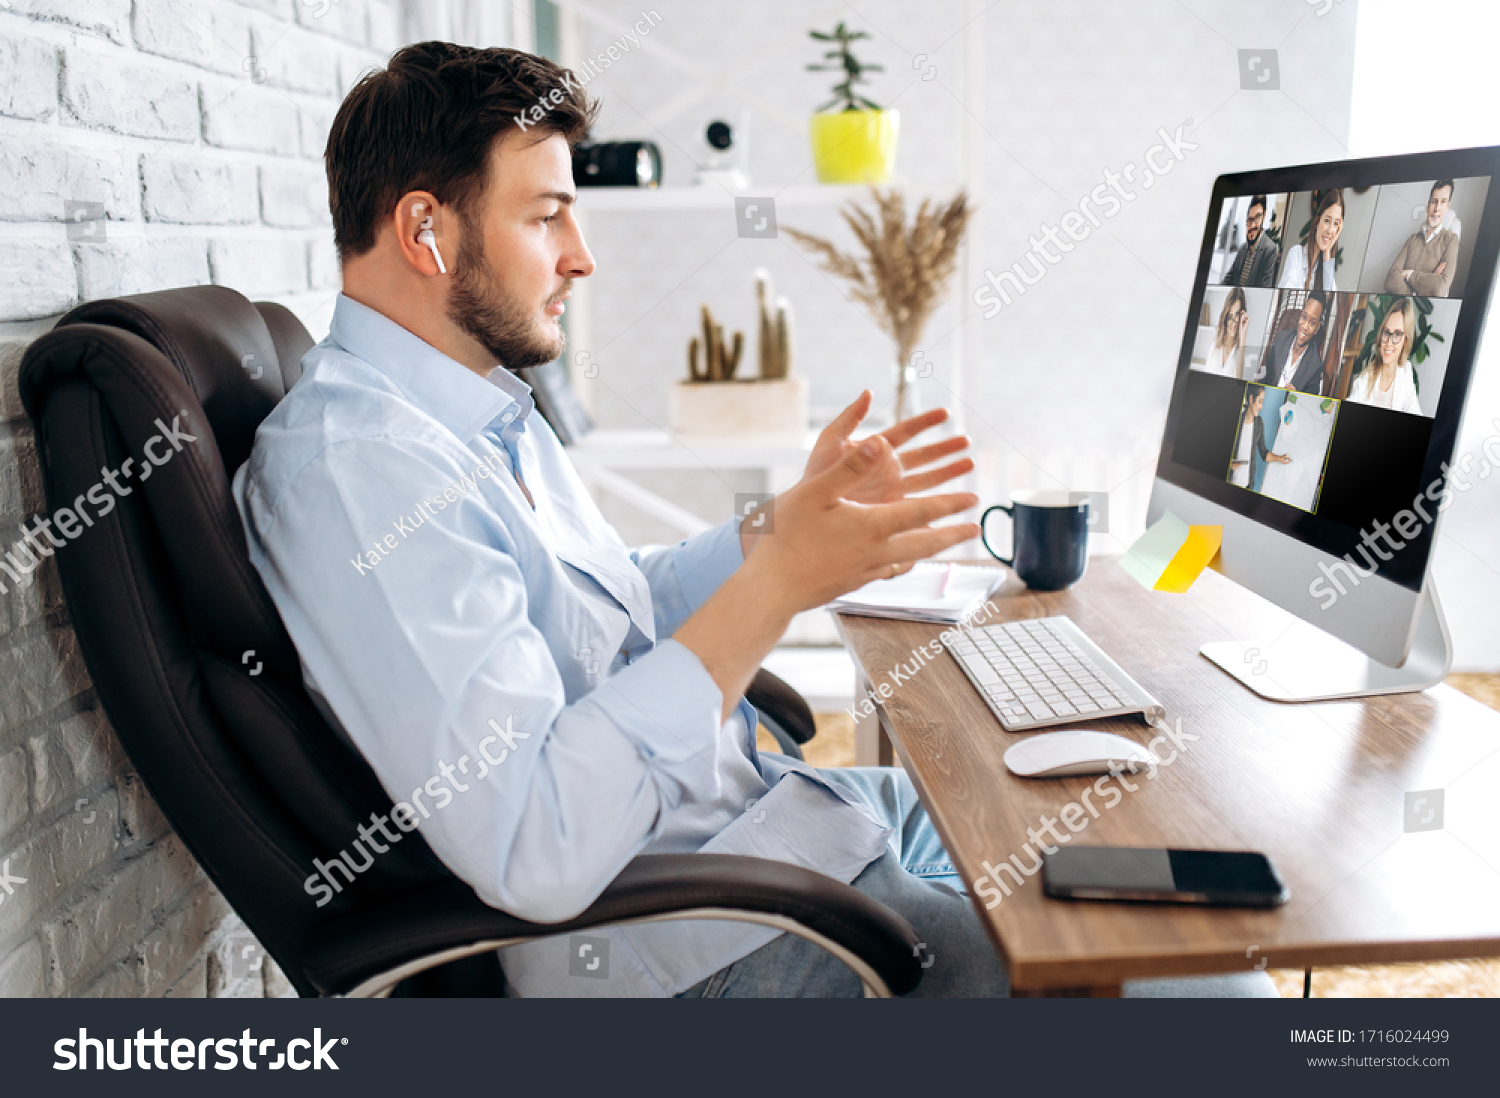 Zoom conference. Business partners communicate via video using laptop. The guy talks with his business partners appearance about plans and strategy. Distant work #1716024499